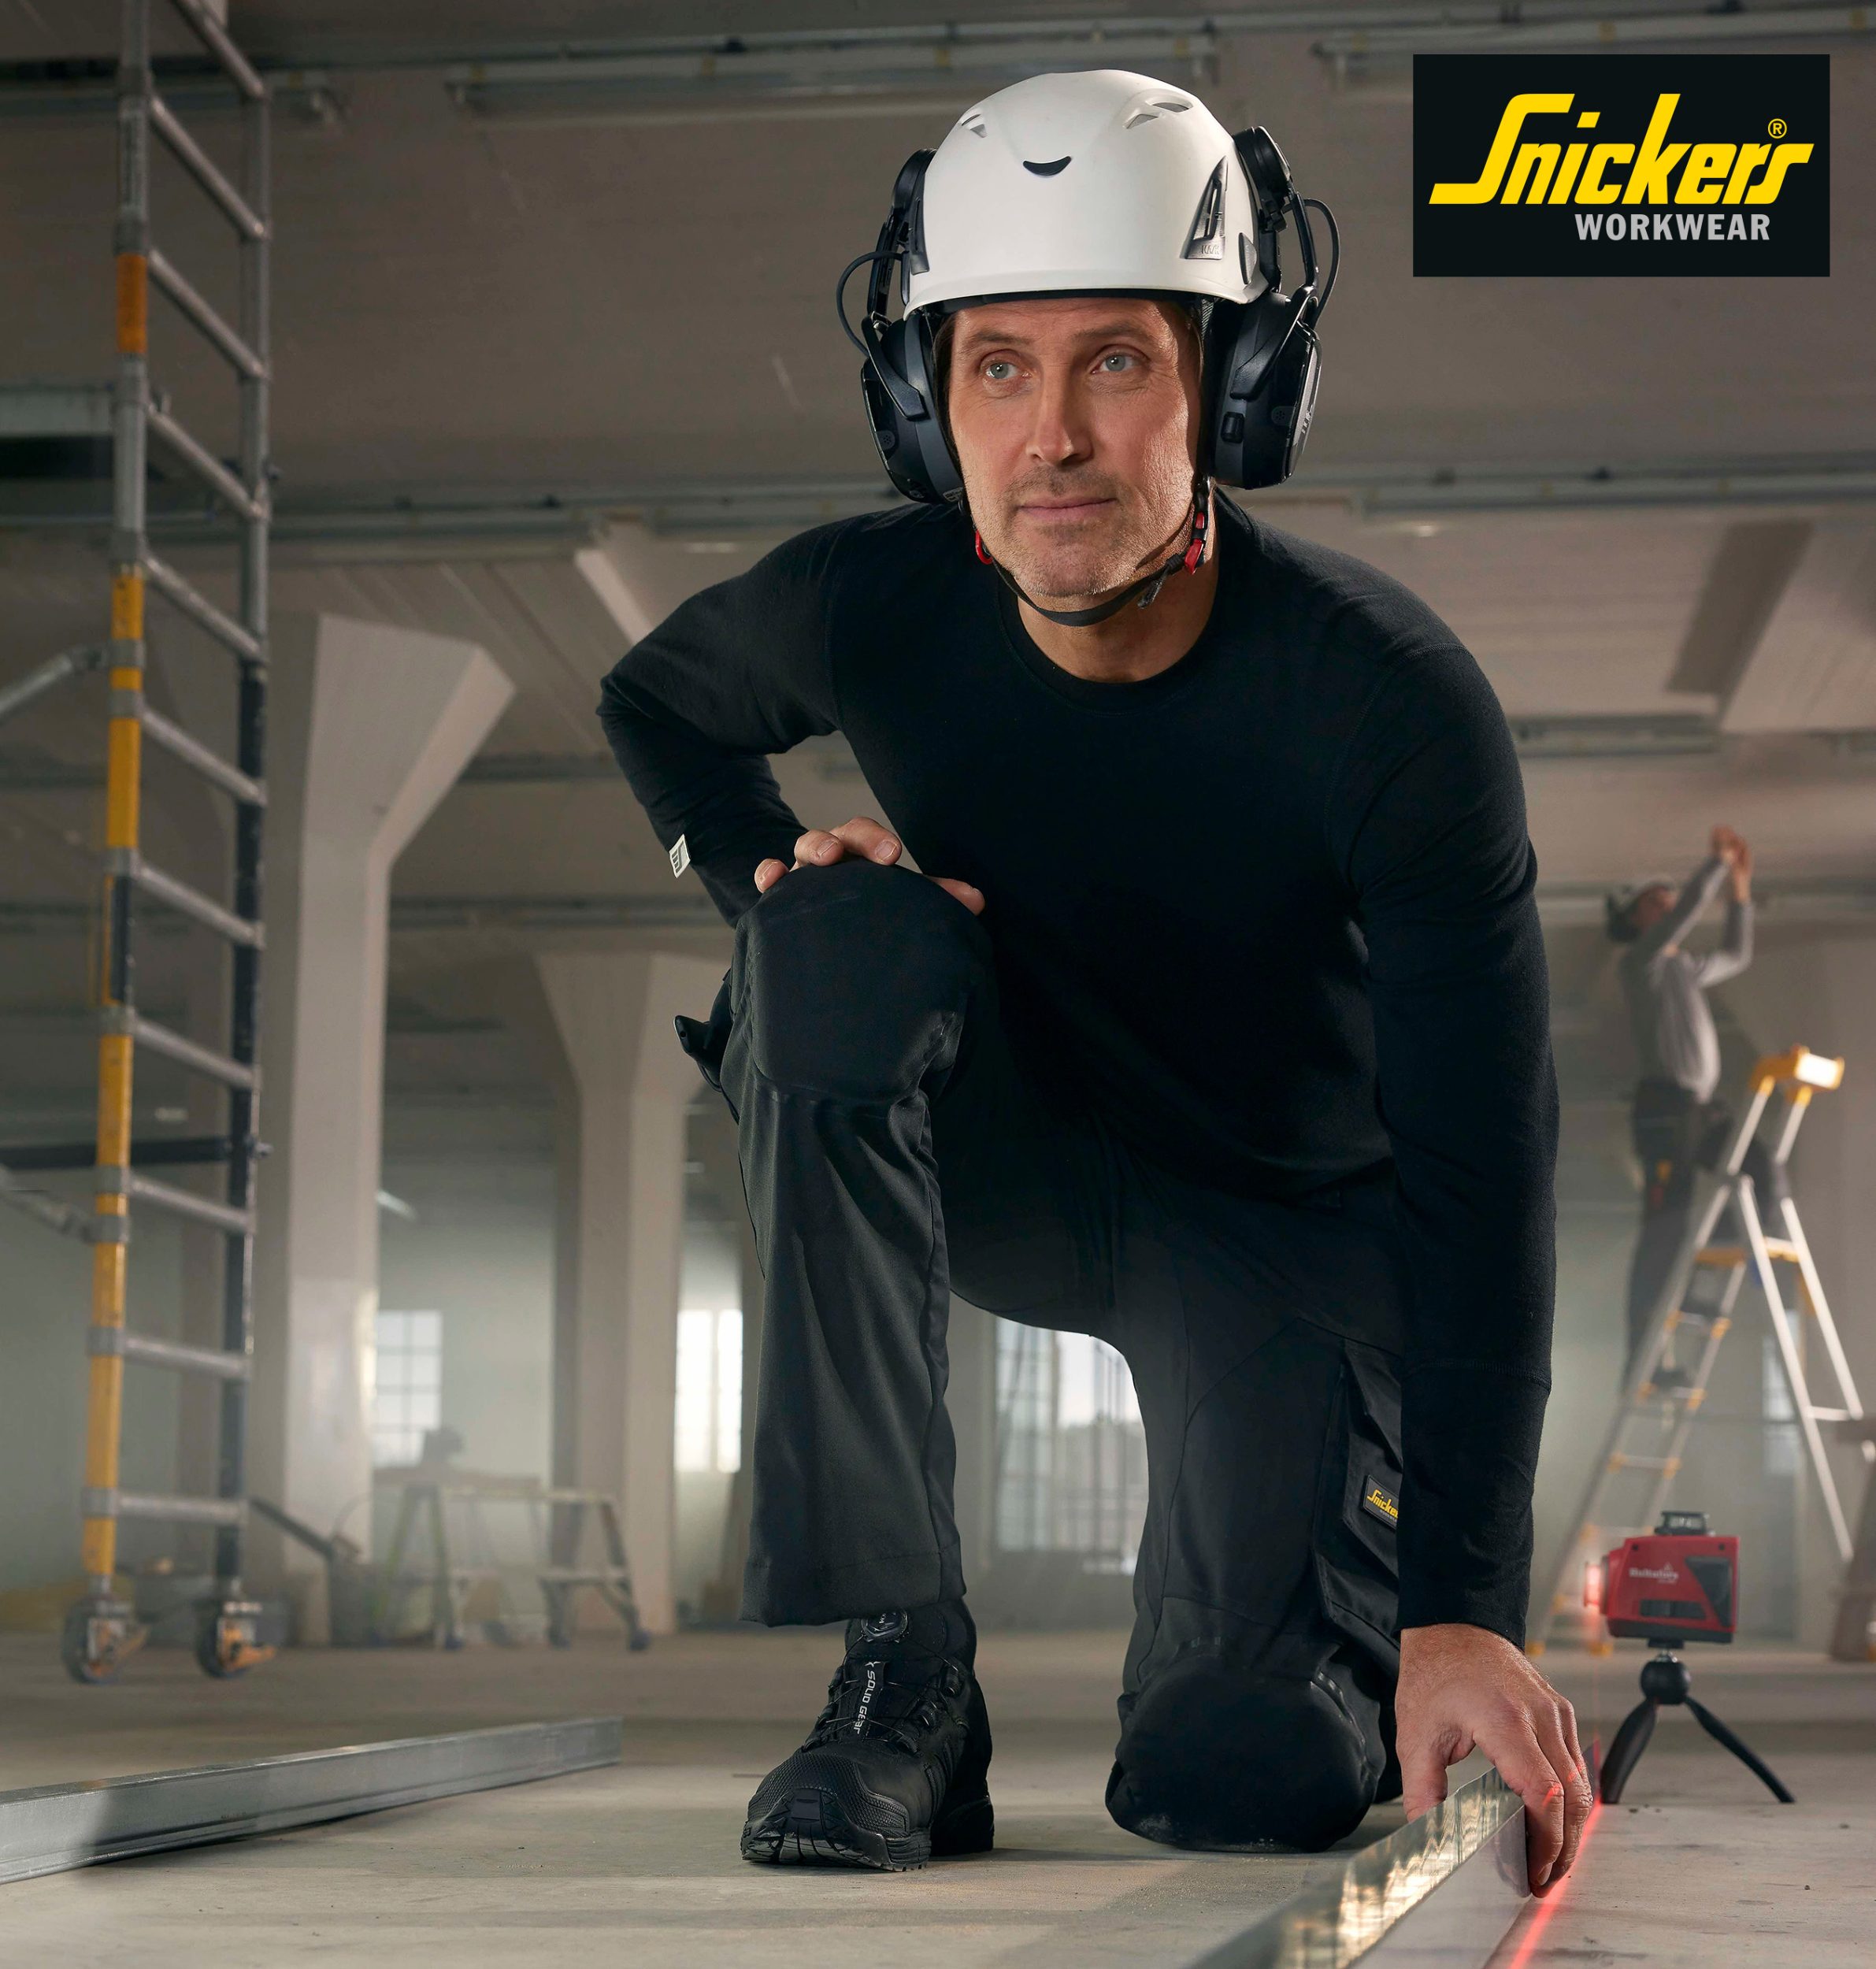 The world’s first work trousers with built-in, certified kneepads